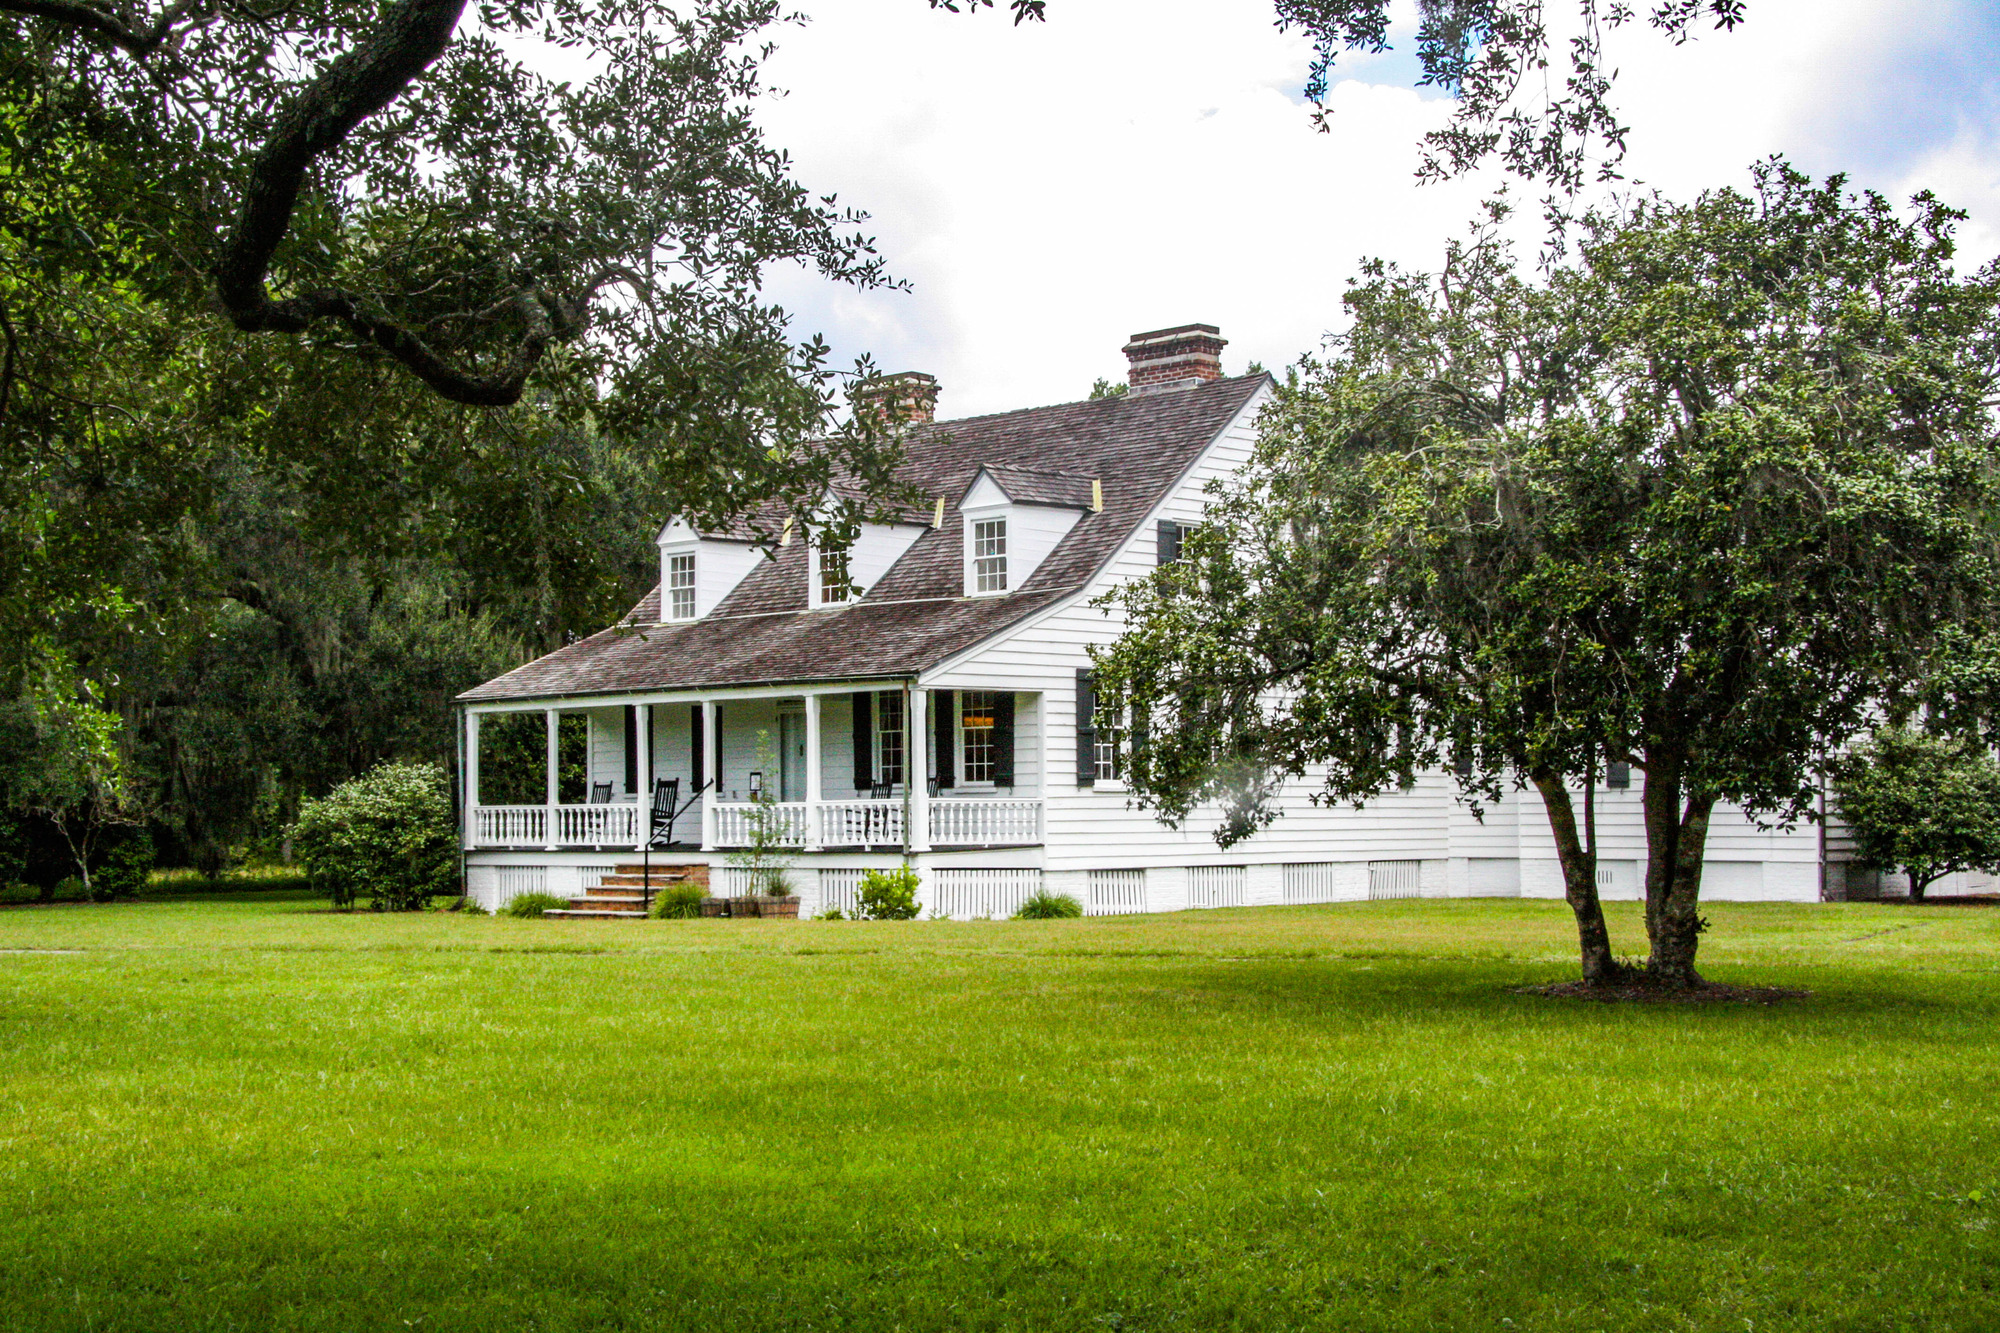 Historic white farm house and lawn